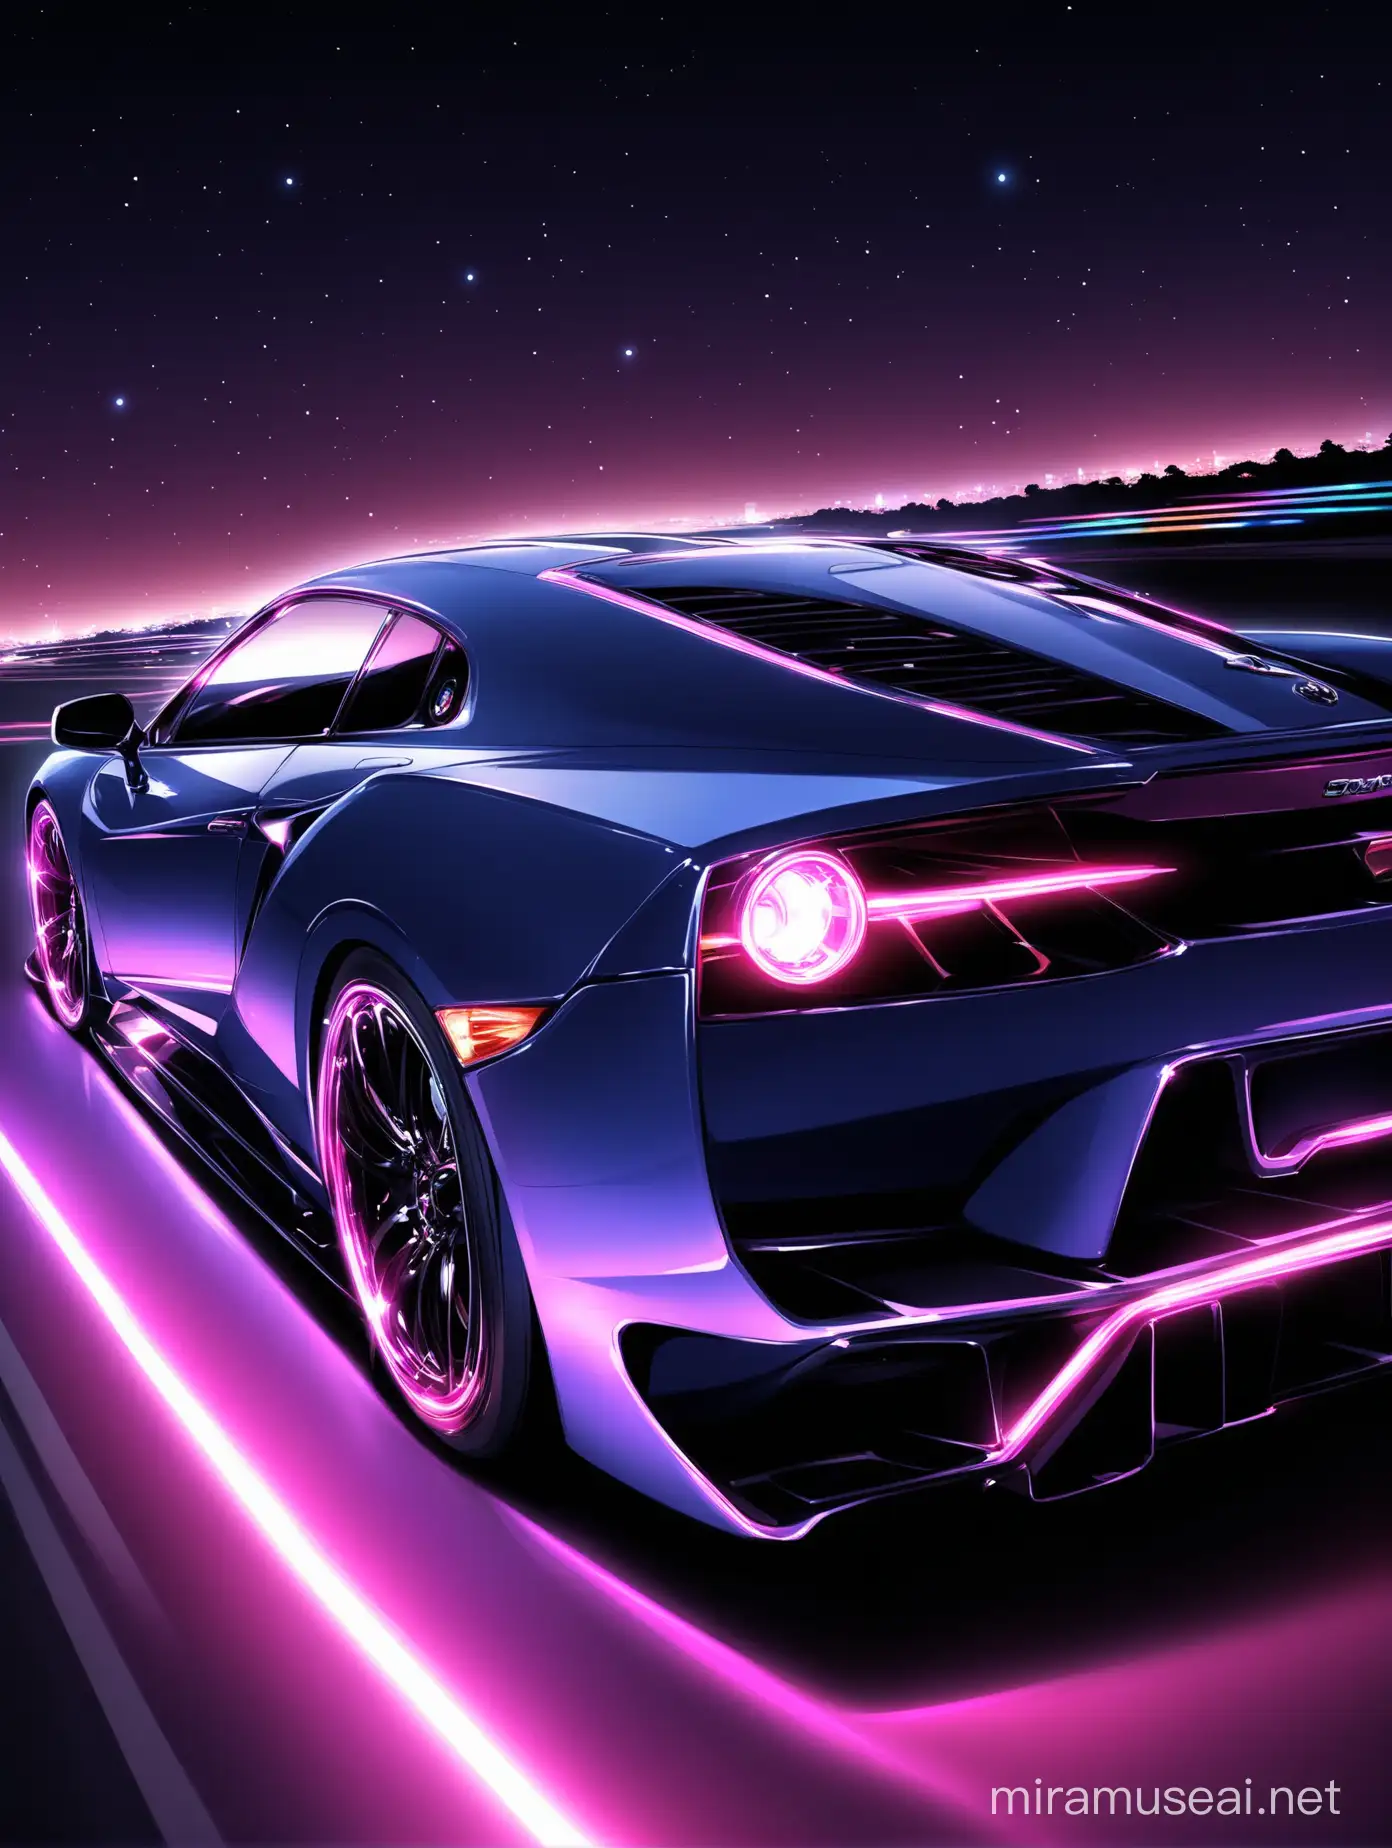 Stunning Car Glow Wallpaper for Automotive Enthusiasts